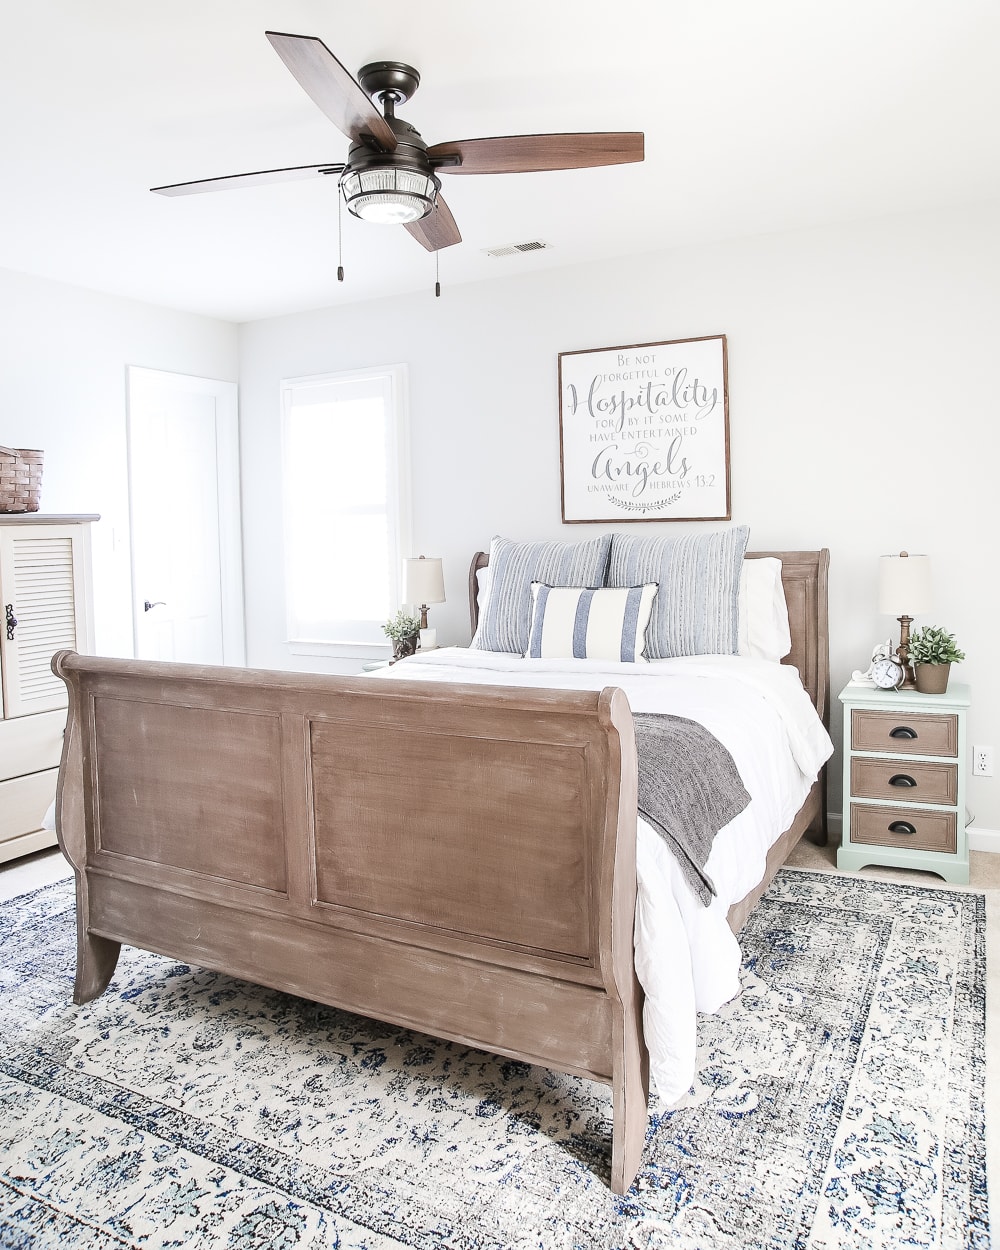 Wooden sleigh bed with white sheets and wooden ceiling fan.